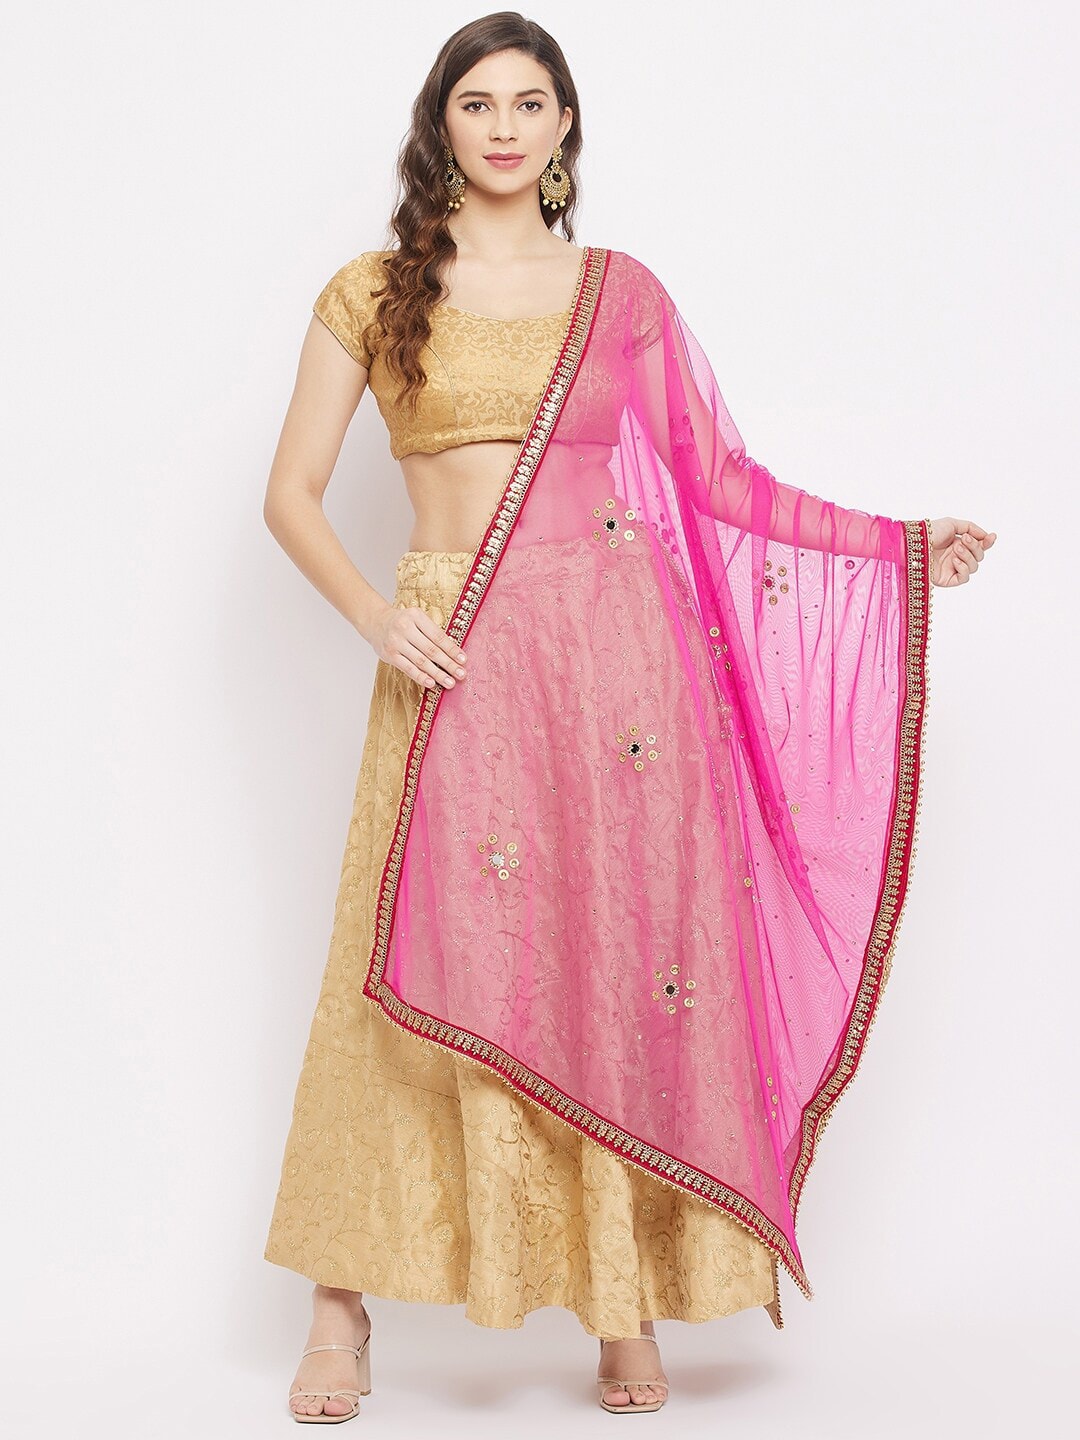 Clora Creation Magenta & Gold Embroidered Foil Print Dupatta with Beads and Stones Price in India